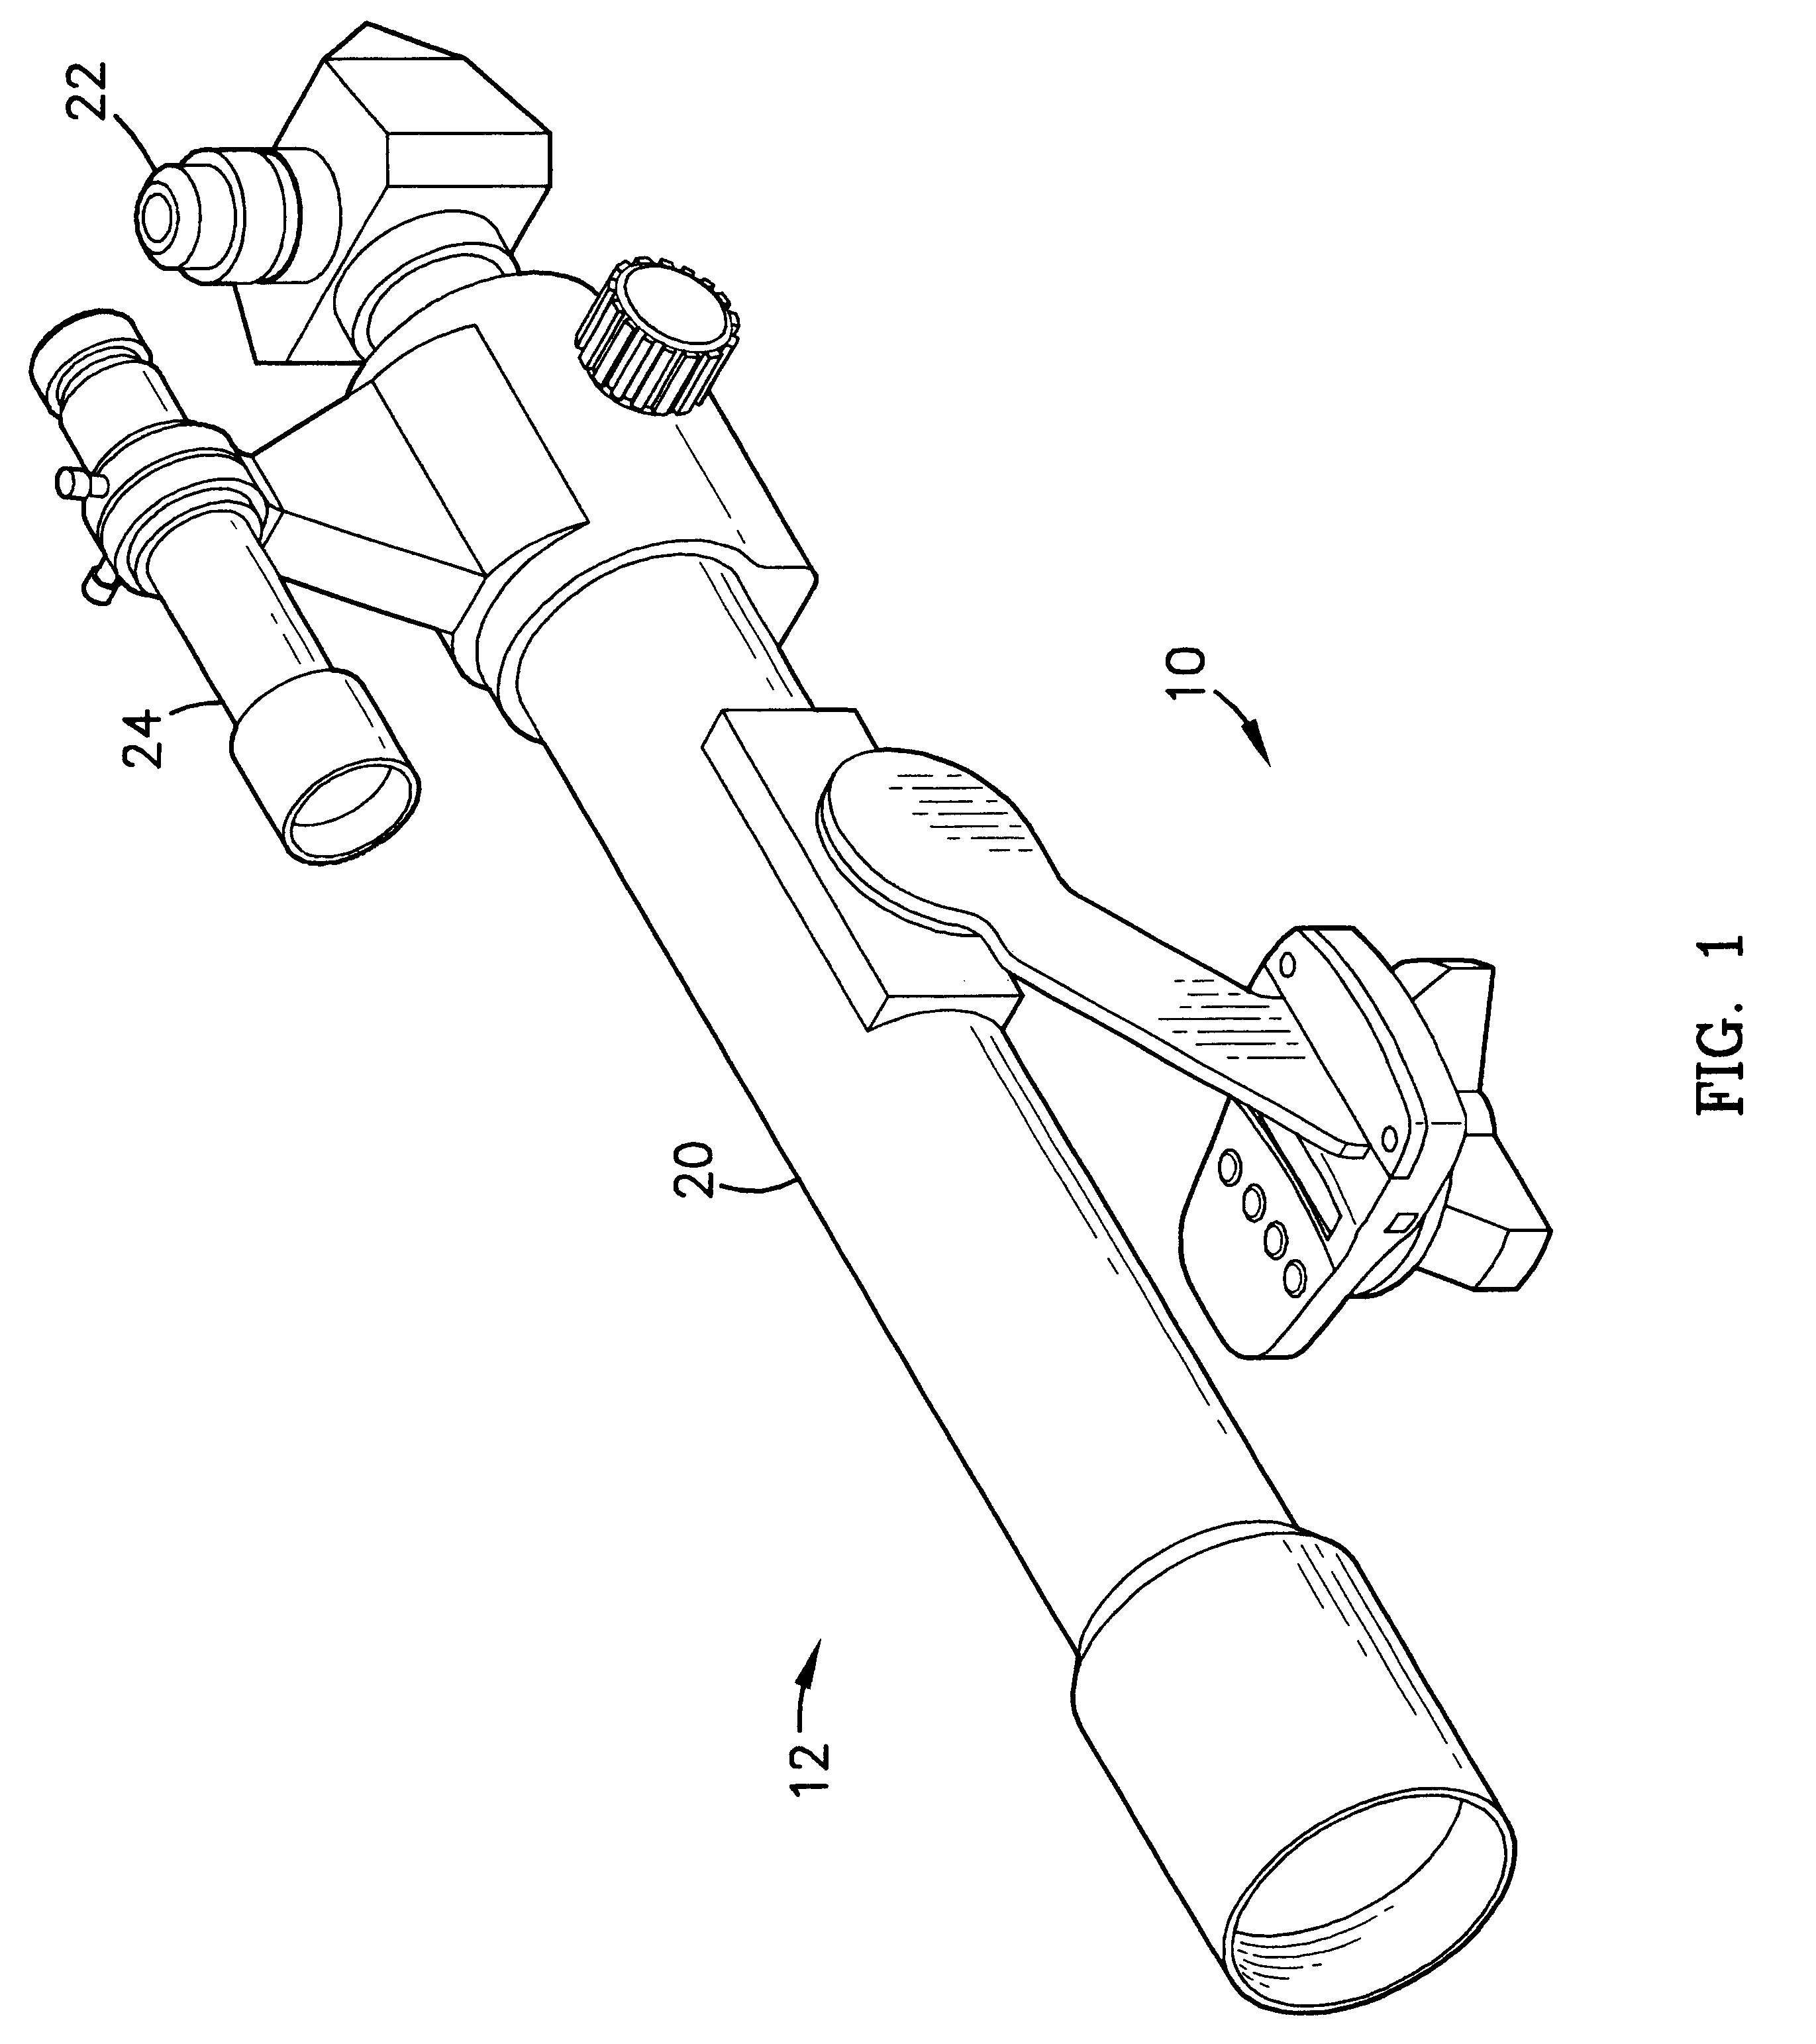 Portable telescope mount with integral locator using magnetic encoders for facilitating location of objects and positioning of a telescope